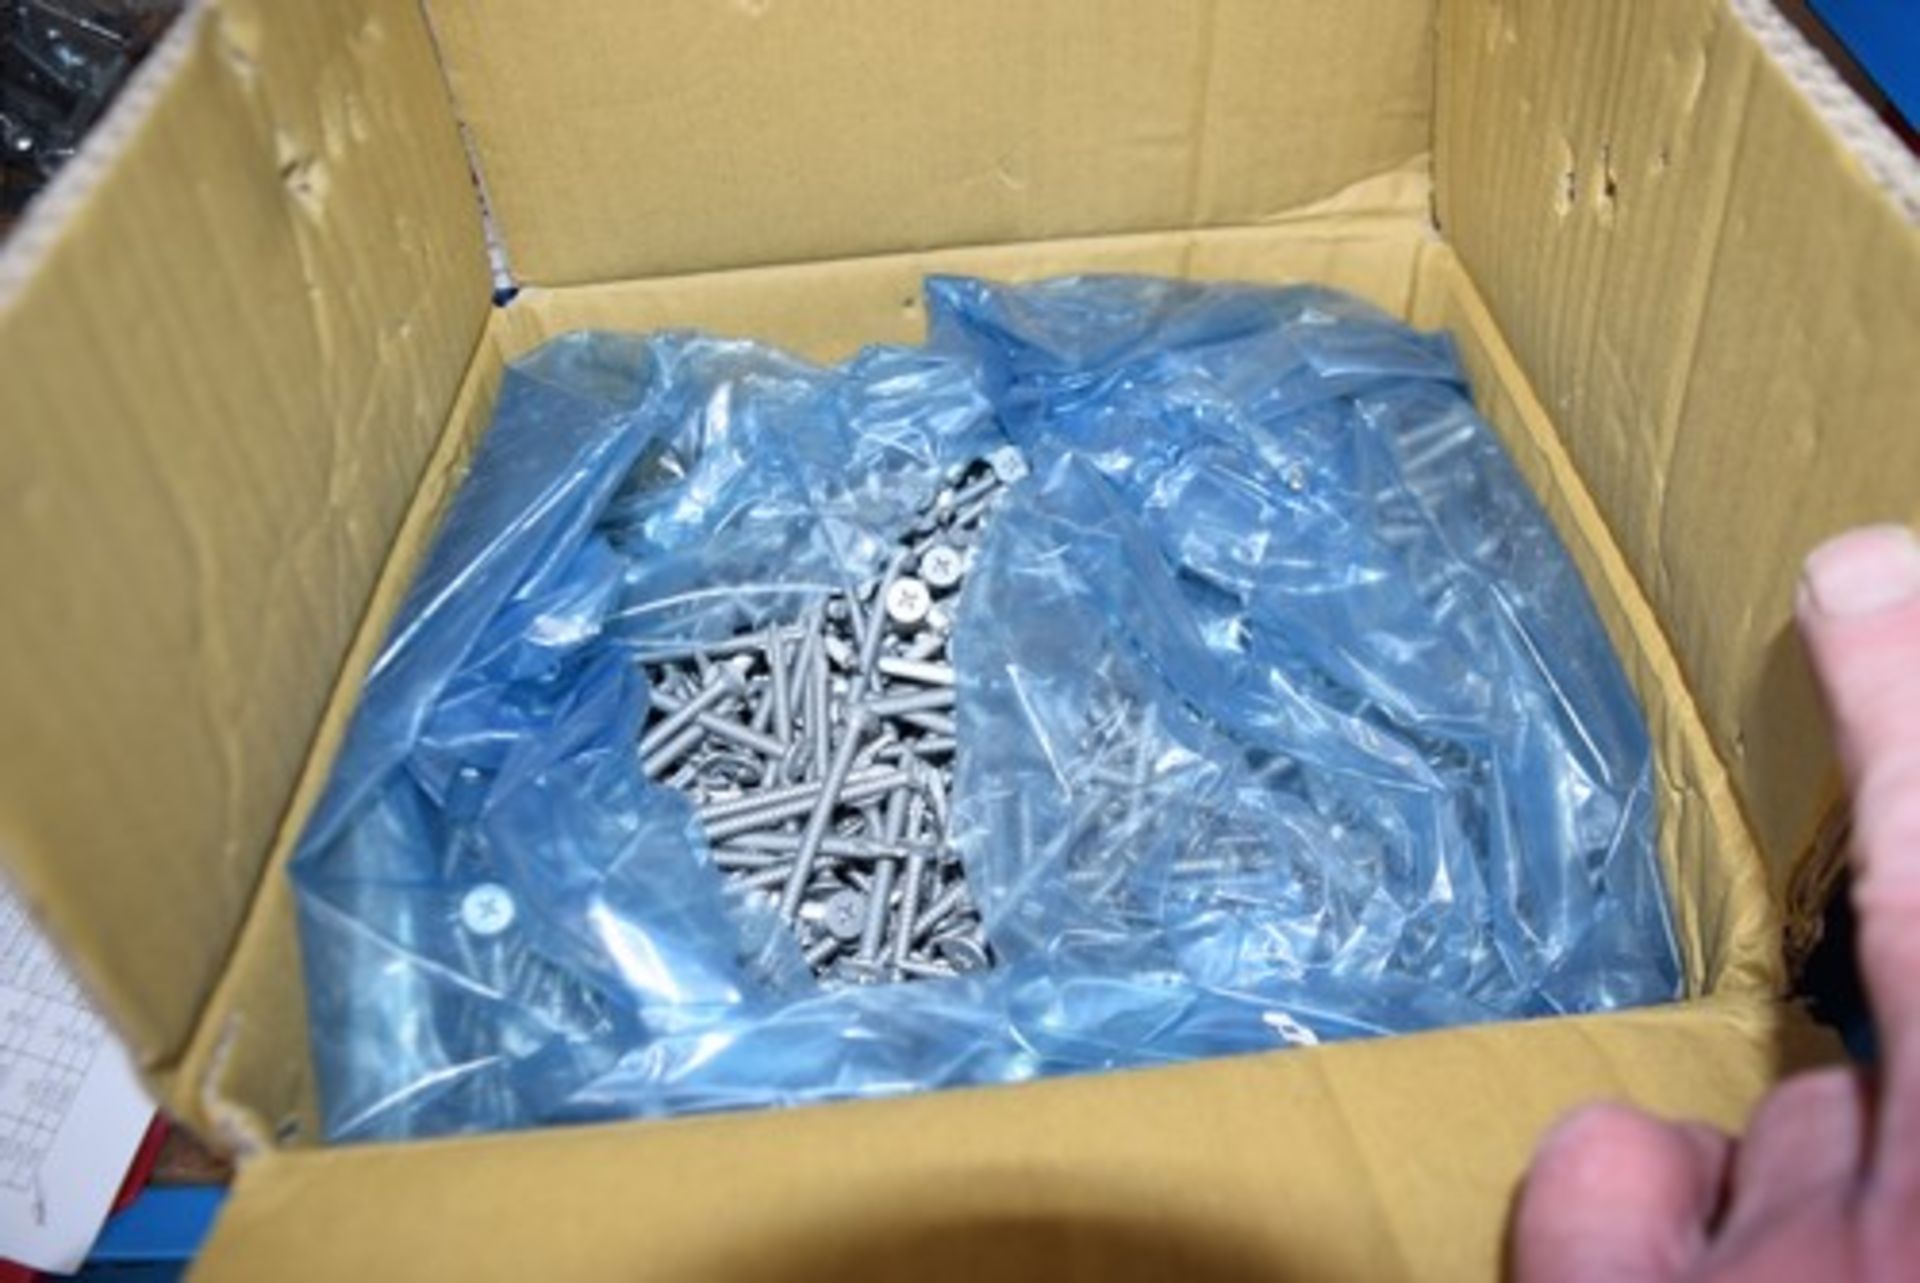 1 box of KW00006902, TBF 4.8 x 66 self tapping screw nails bulk, 2000 pieces approximately - New ( - Image 3 of 3